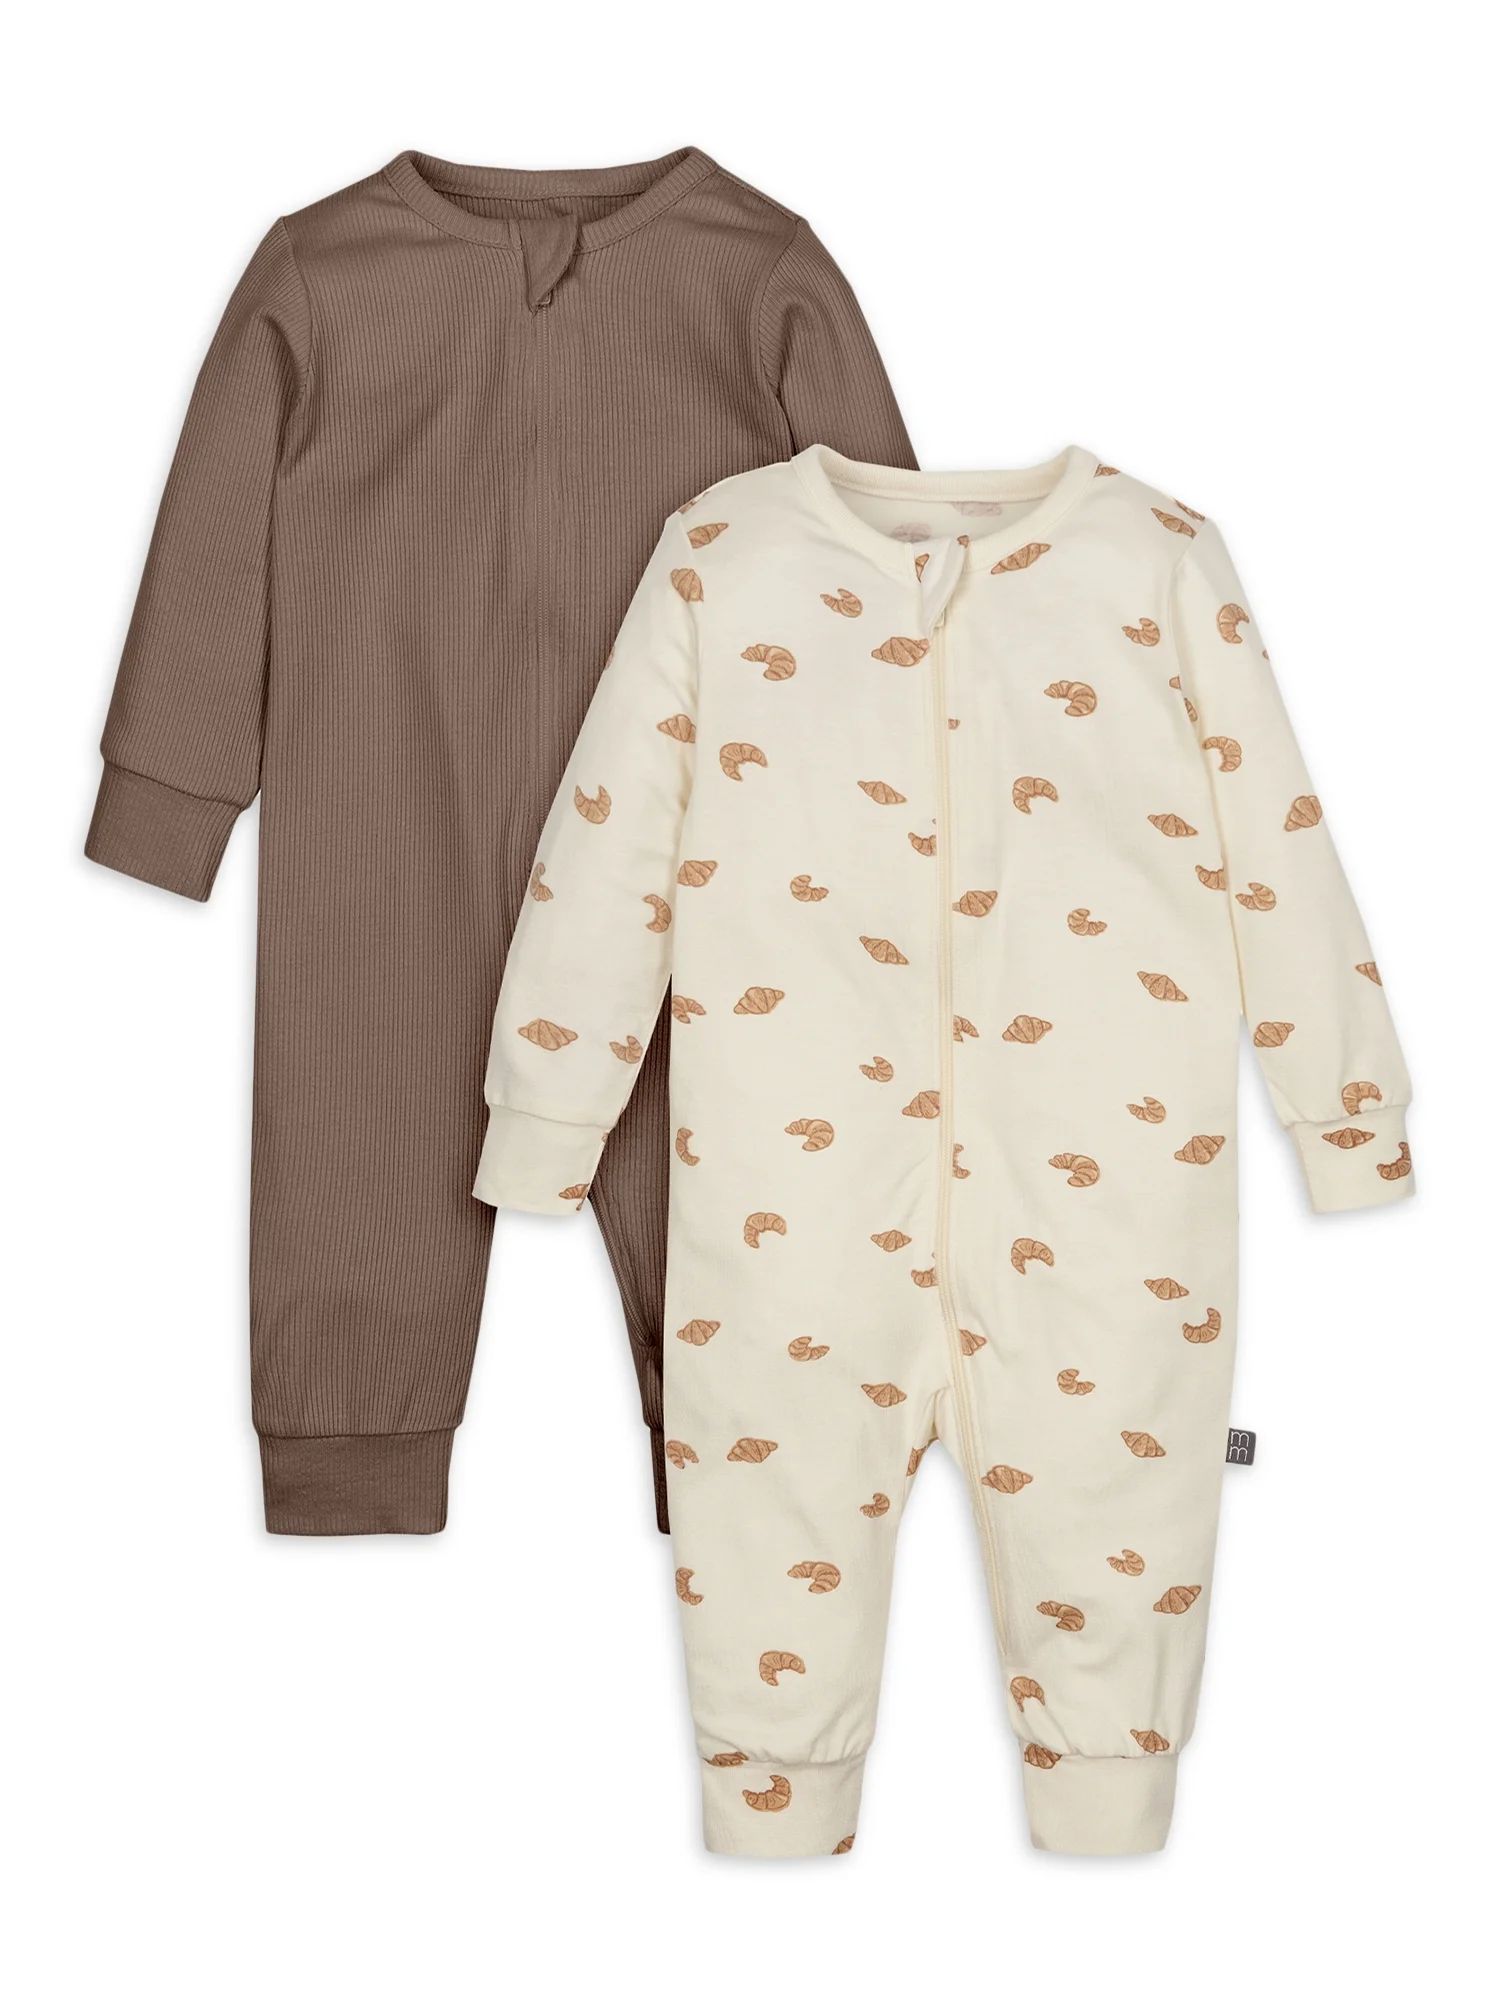 Modern Moments by Gerber Baby Unisex Super Soft Coveralls, 2-Pack, Sizes Newborn - 12 Months | Walmart (US)